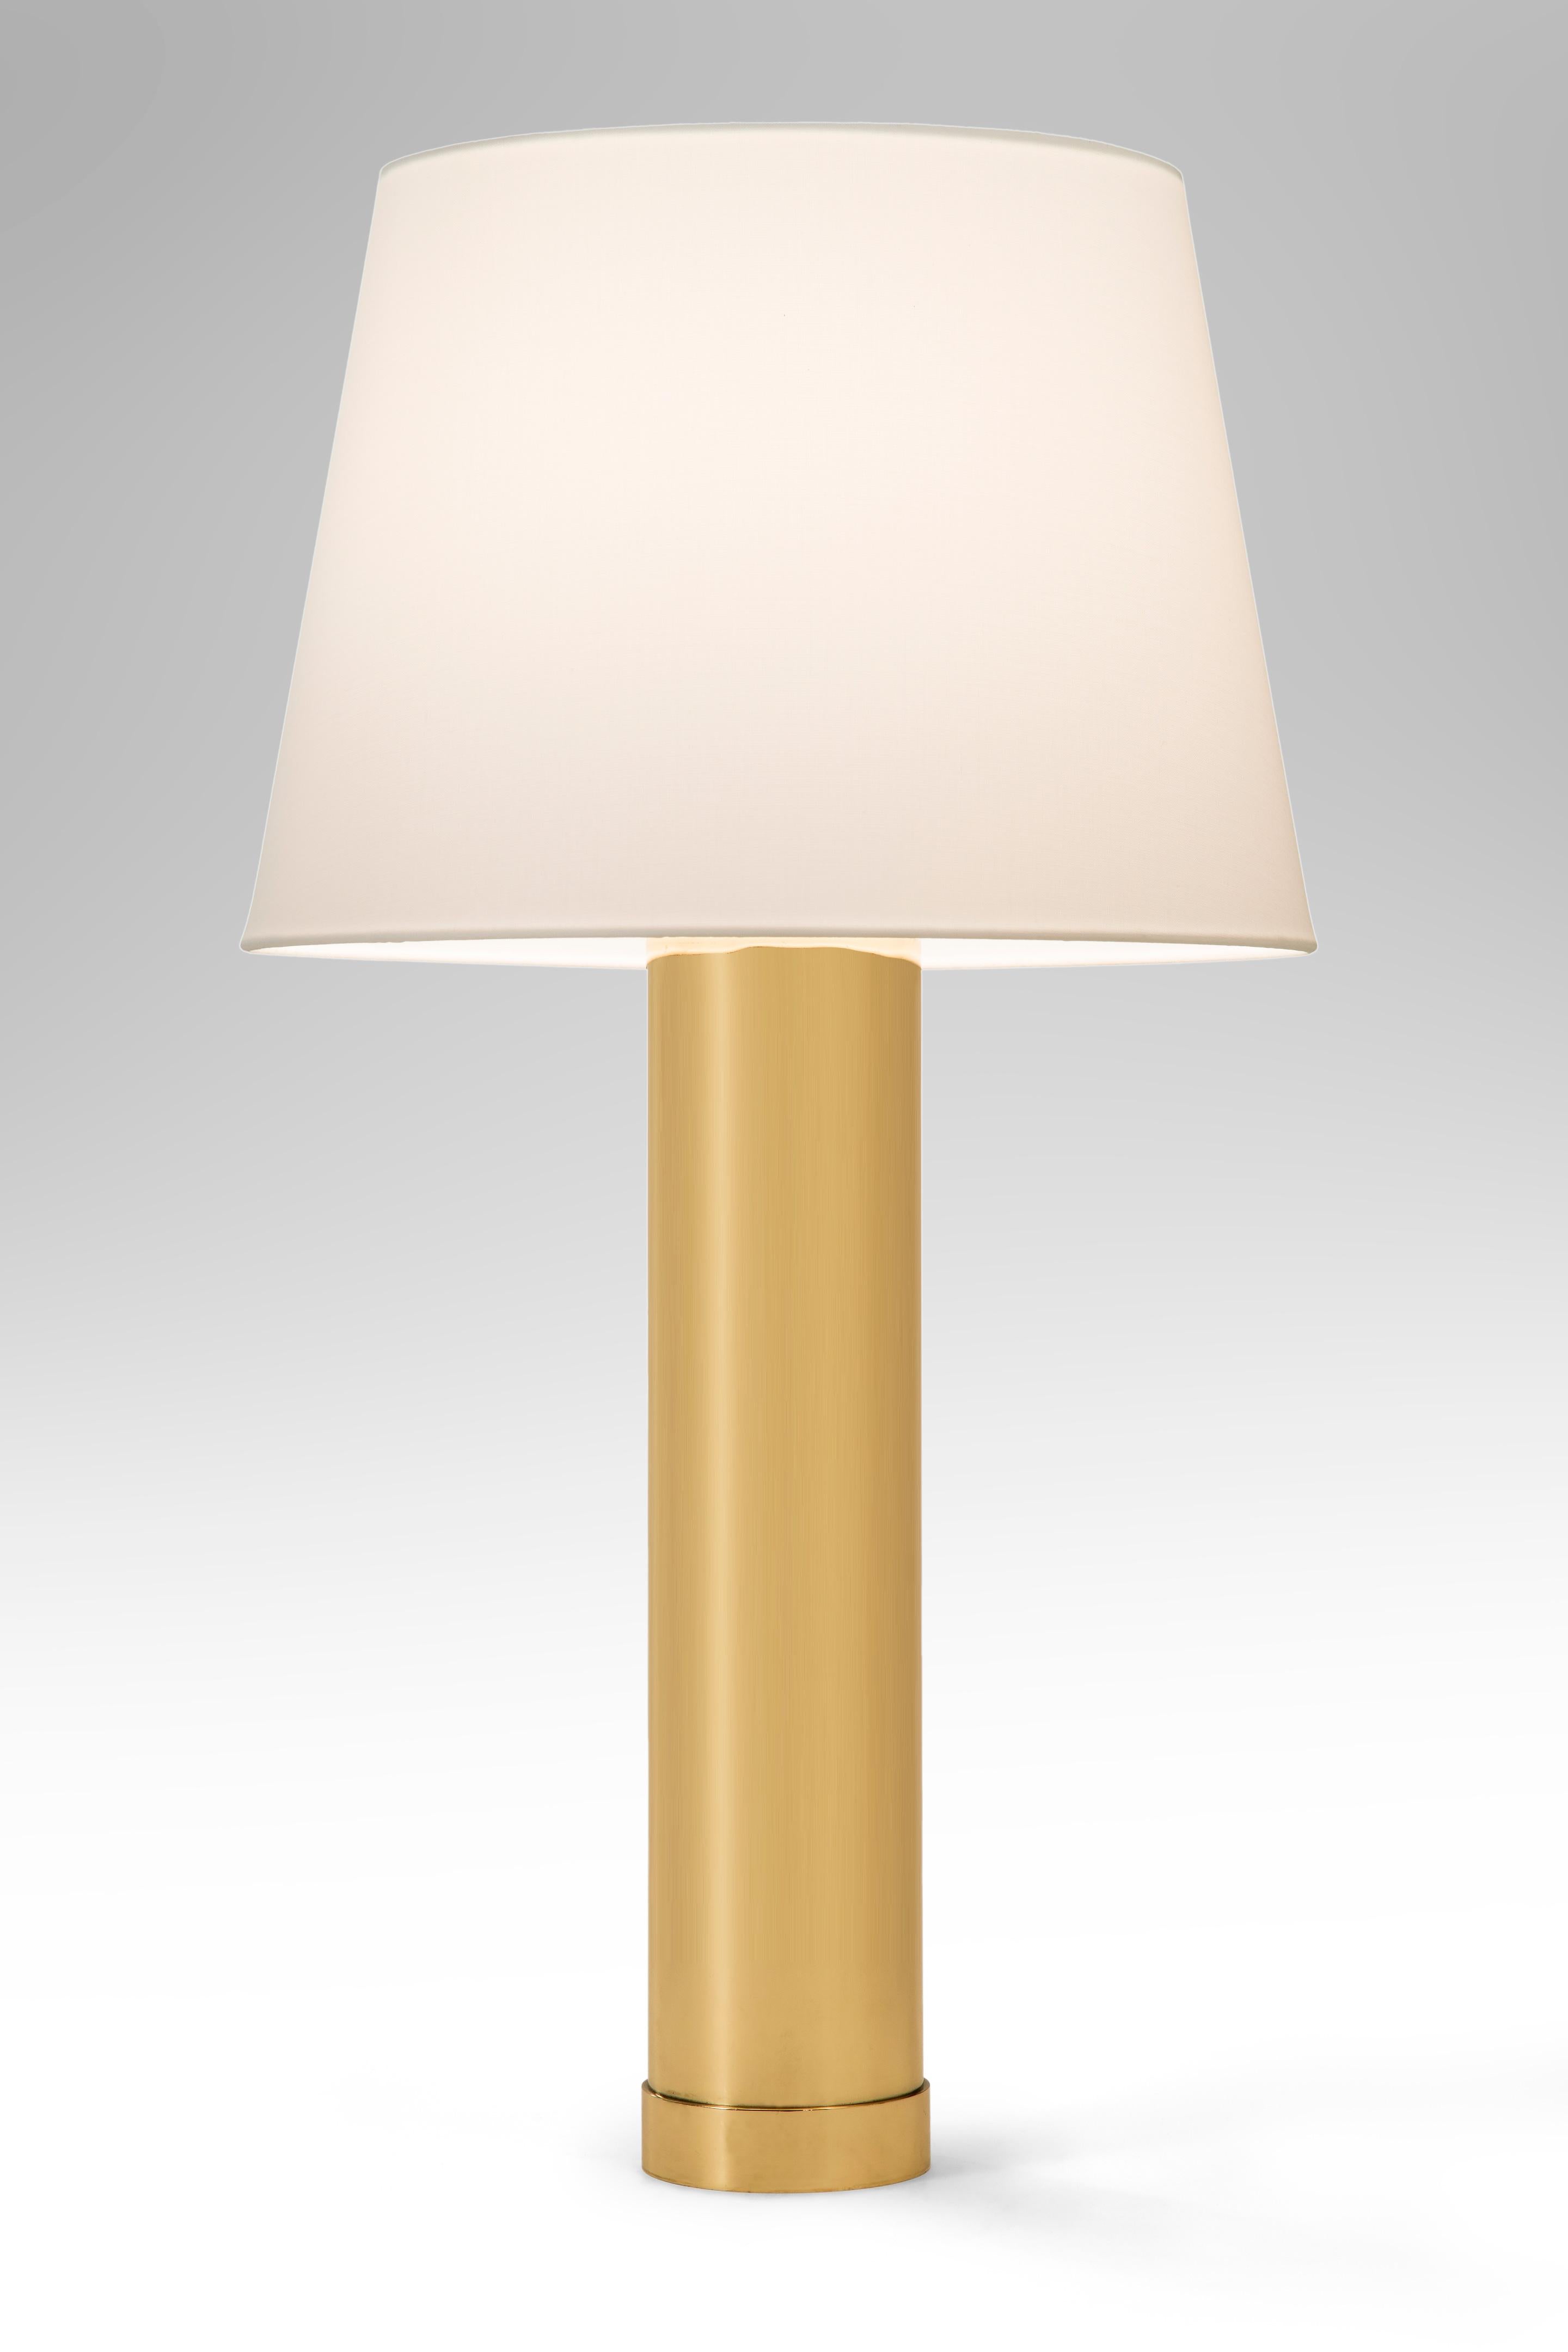 Pair of Swedish Mid-Century Modern brass lamps by Bergboms
Mid-20th century
Simple and elegant these stunning brass lamps would add distinction to any interior. Sometimes the most restrained design is the most powerful. Each brass columnar lamp